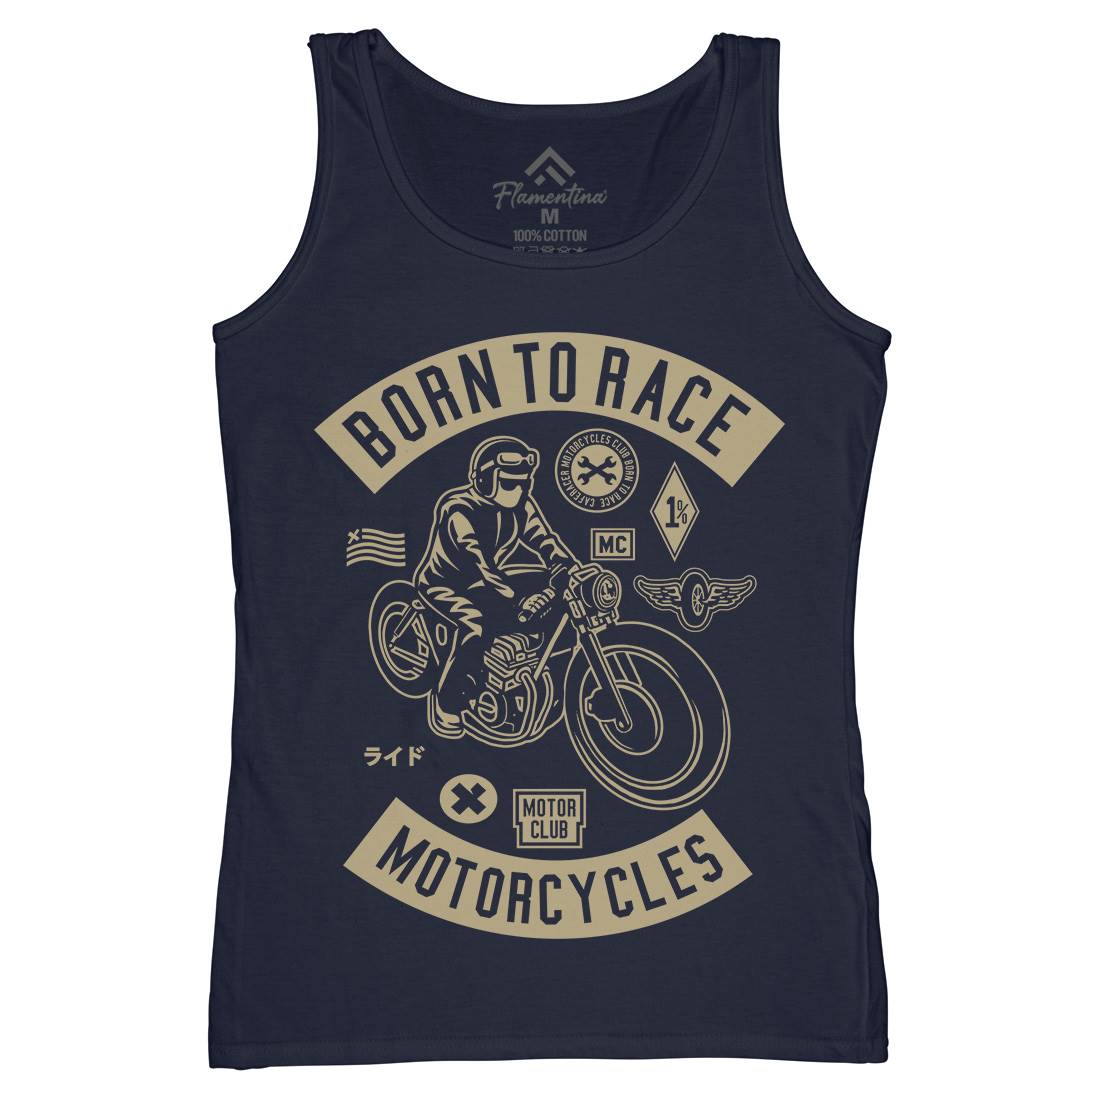 Born To Race Womens Organic Tank Top Vest Motorcycles A210